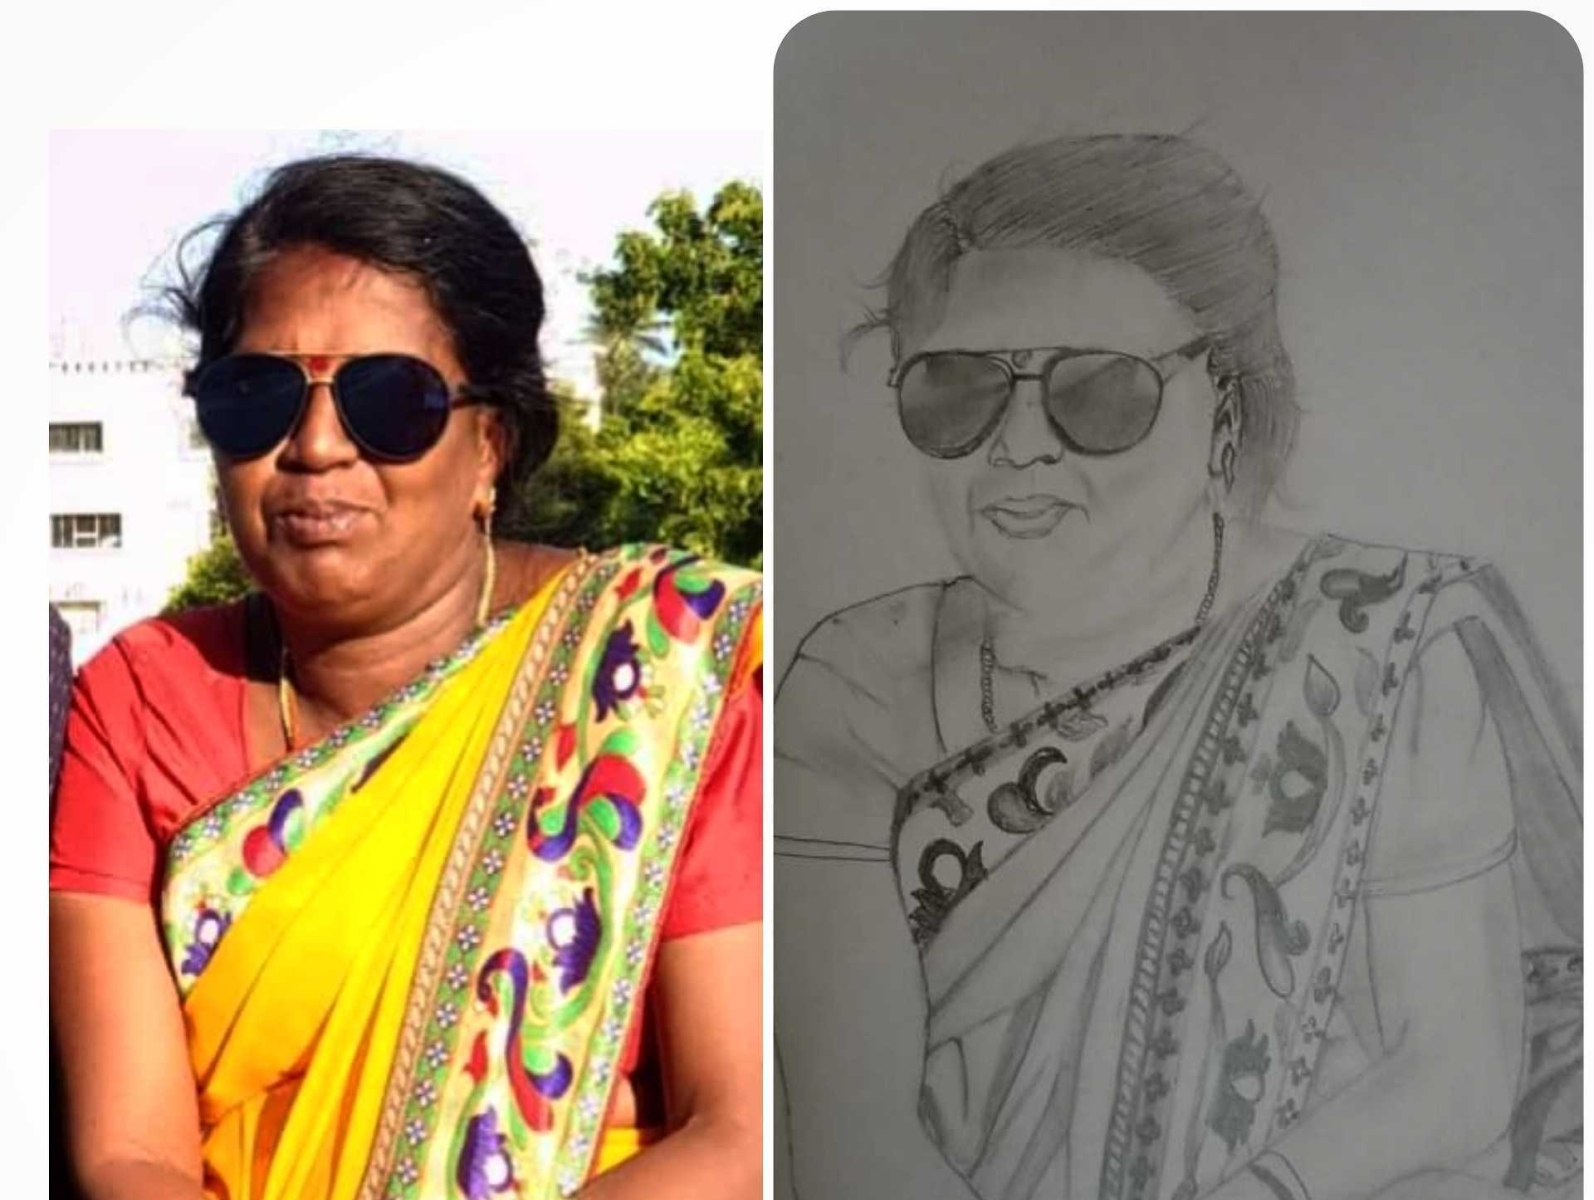 PORTRAIT OF MOTHER #Amma #love by Sangeetha R on Dribbble